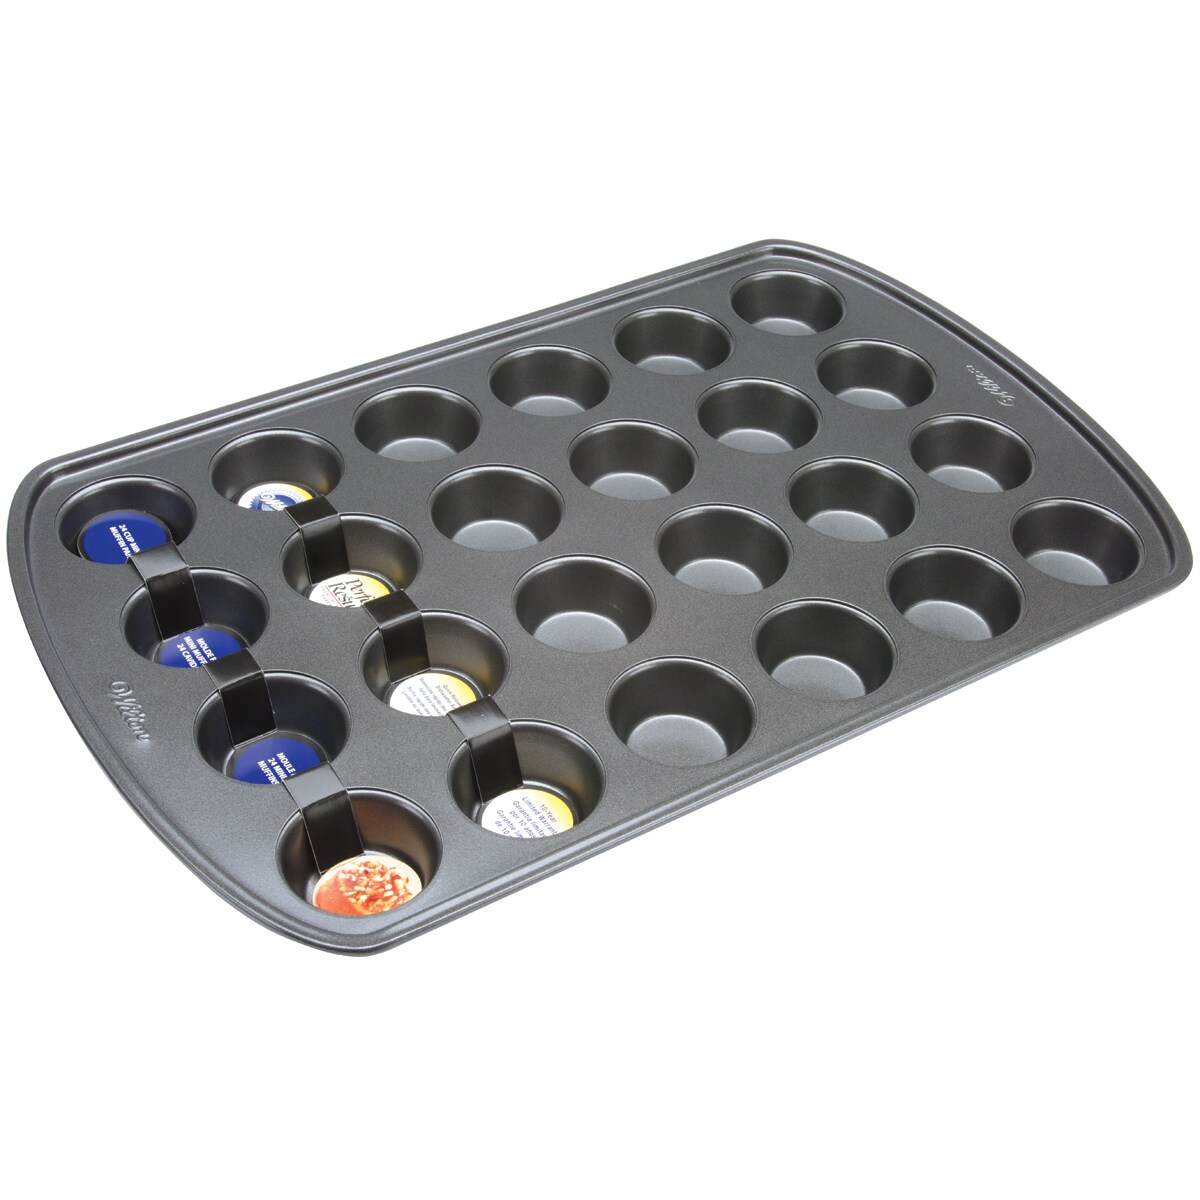 Wilton Bake It Better Non-Stick Muffin and Cupcake Pan, 24-Cup